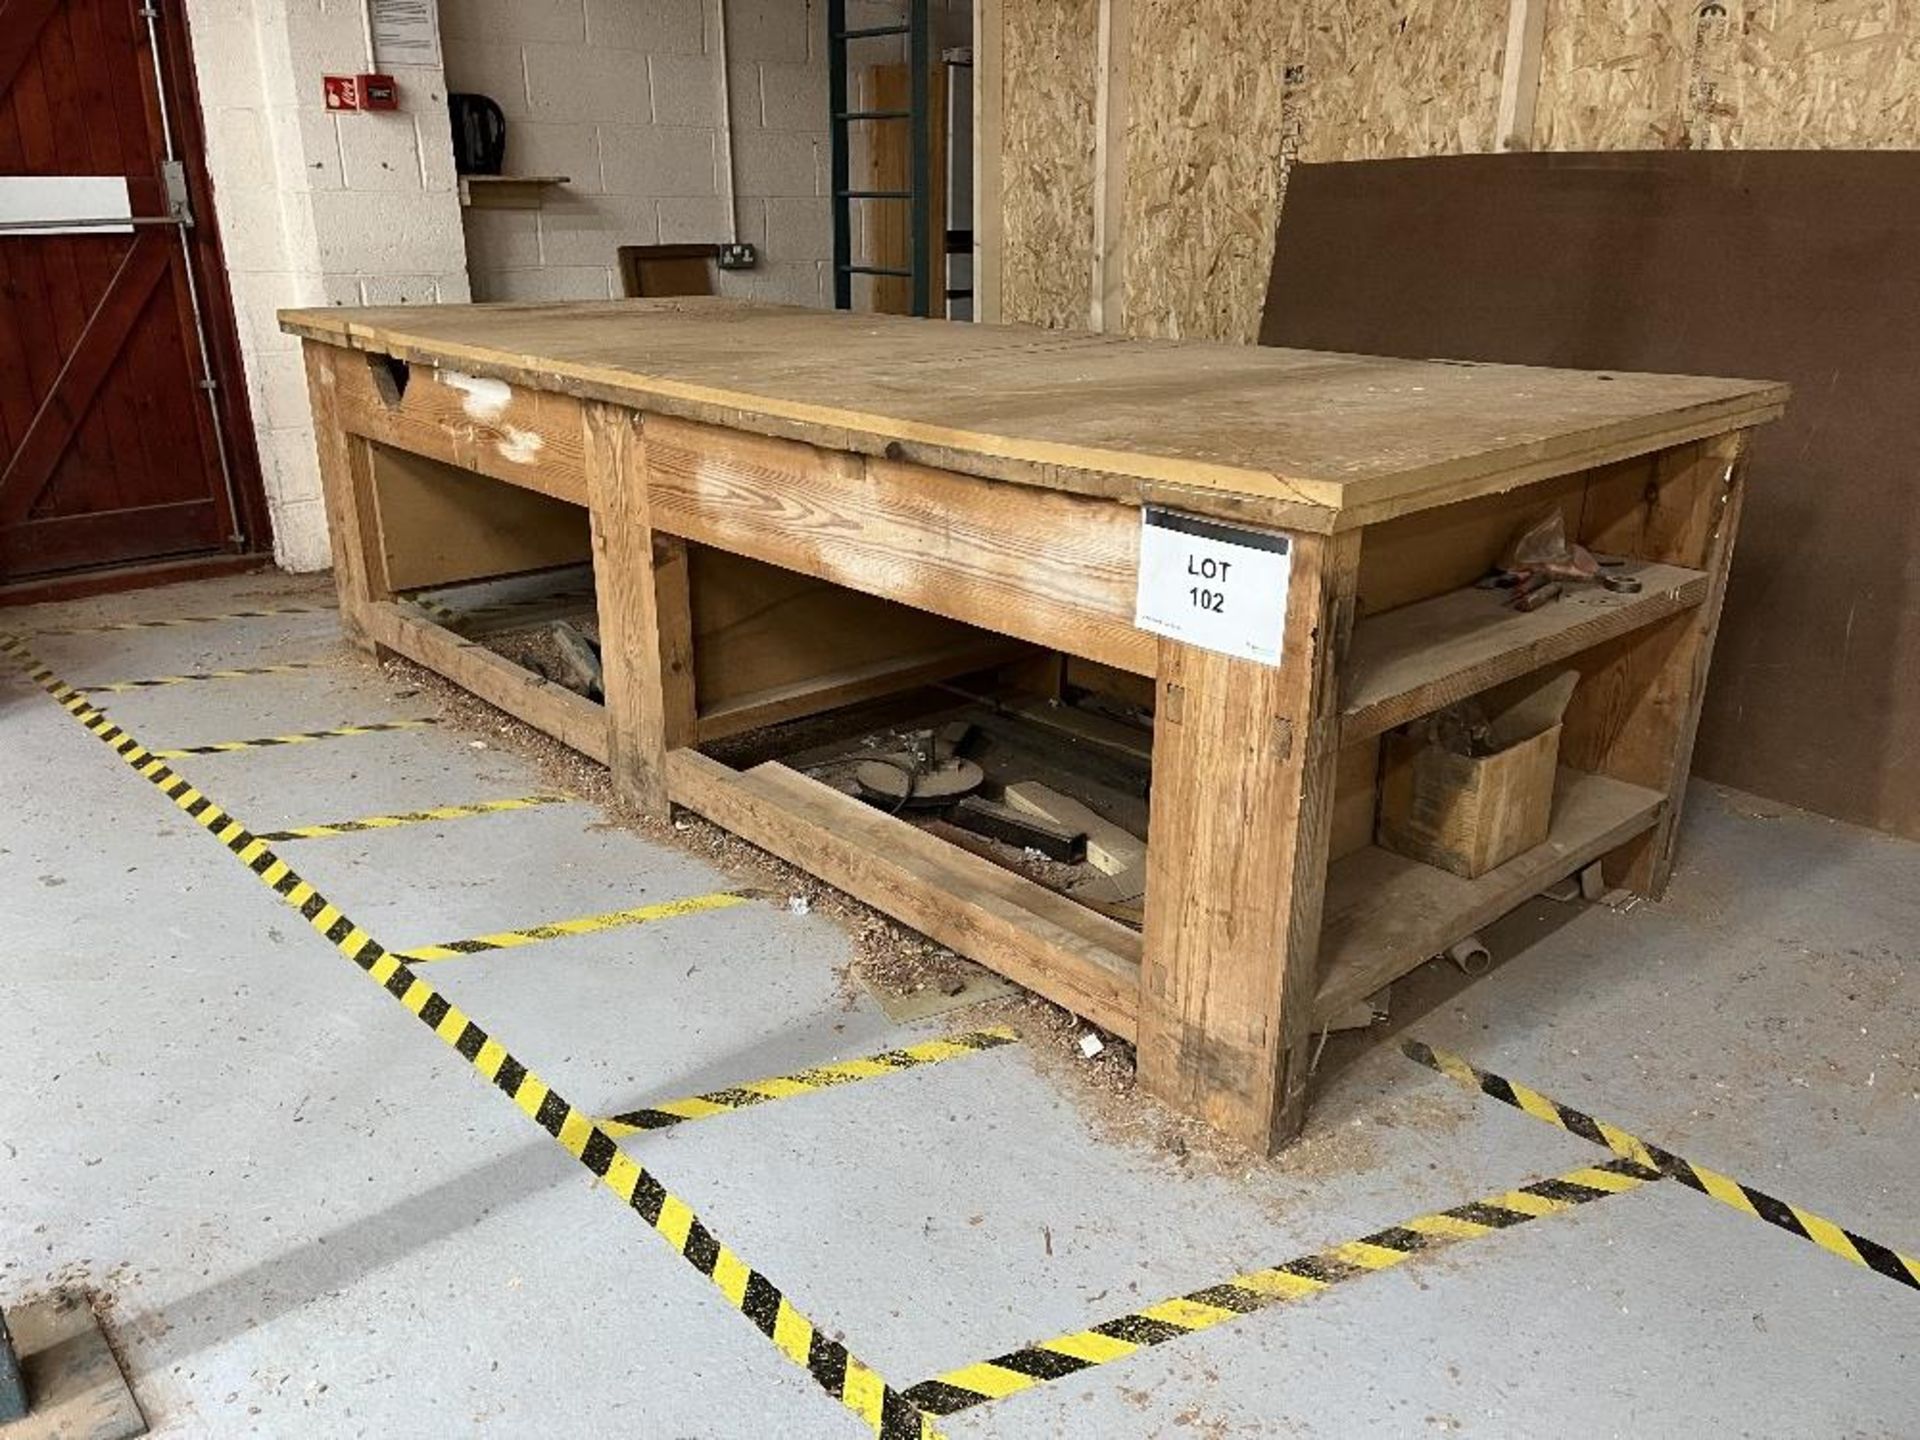 Wooden carpentry bench